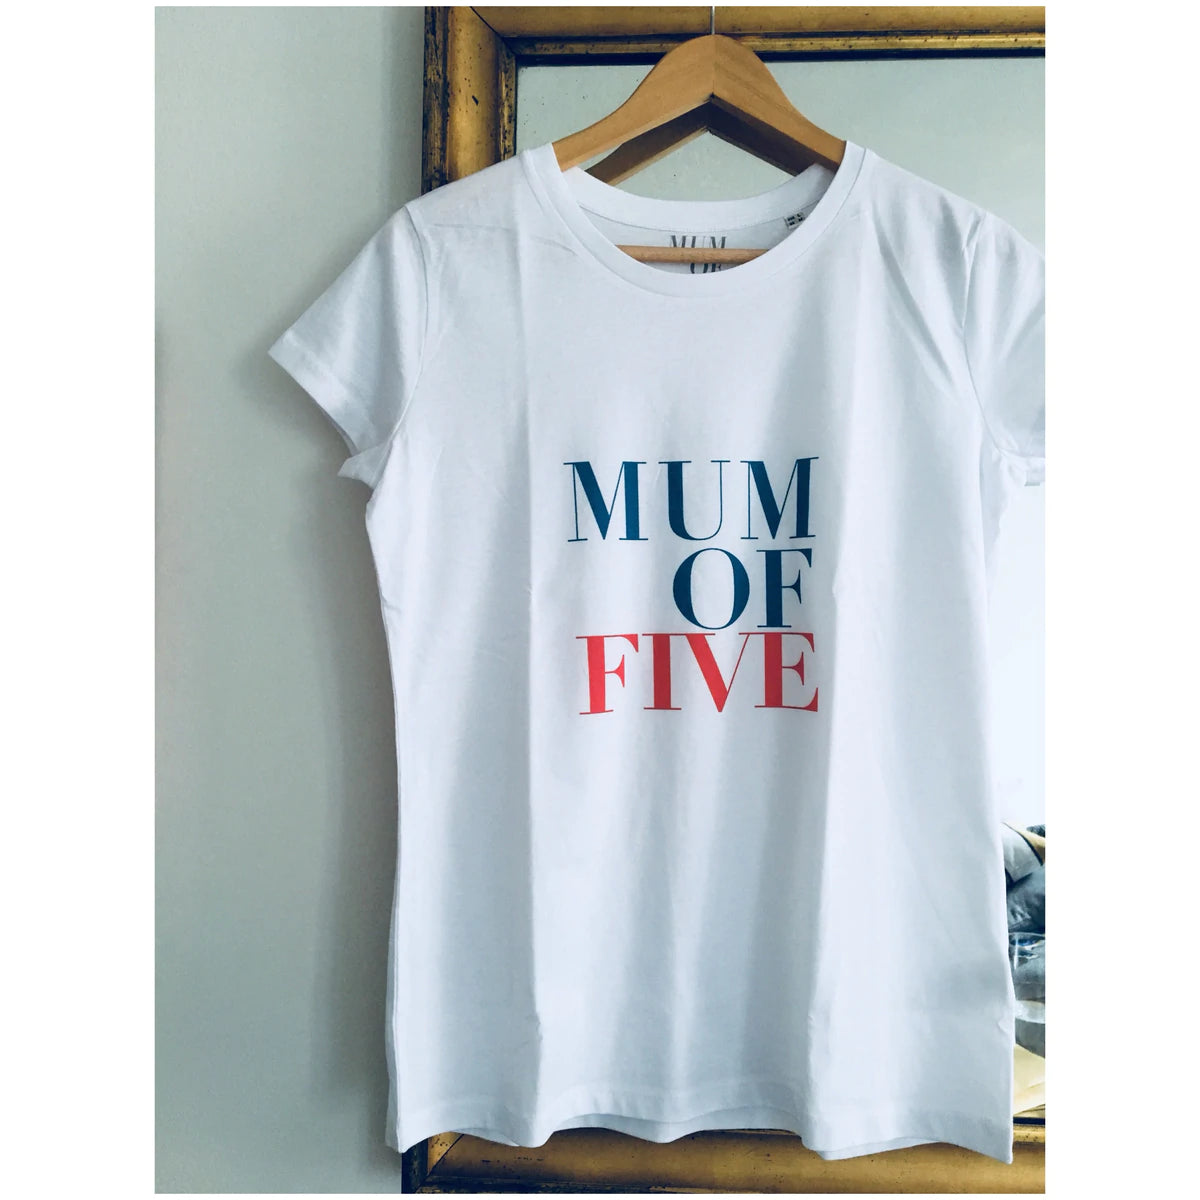 A MUM OF FIVE ICONIC T-shirt